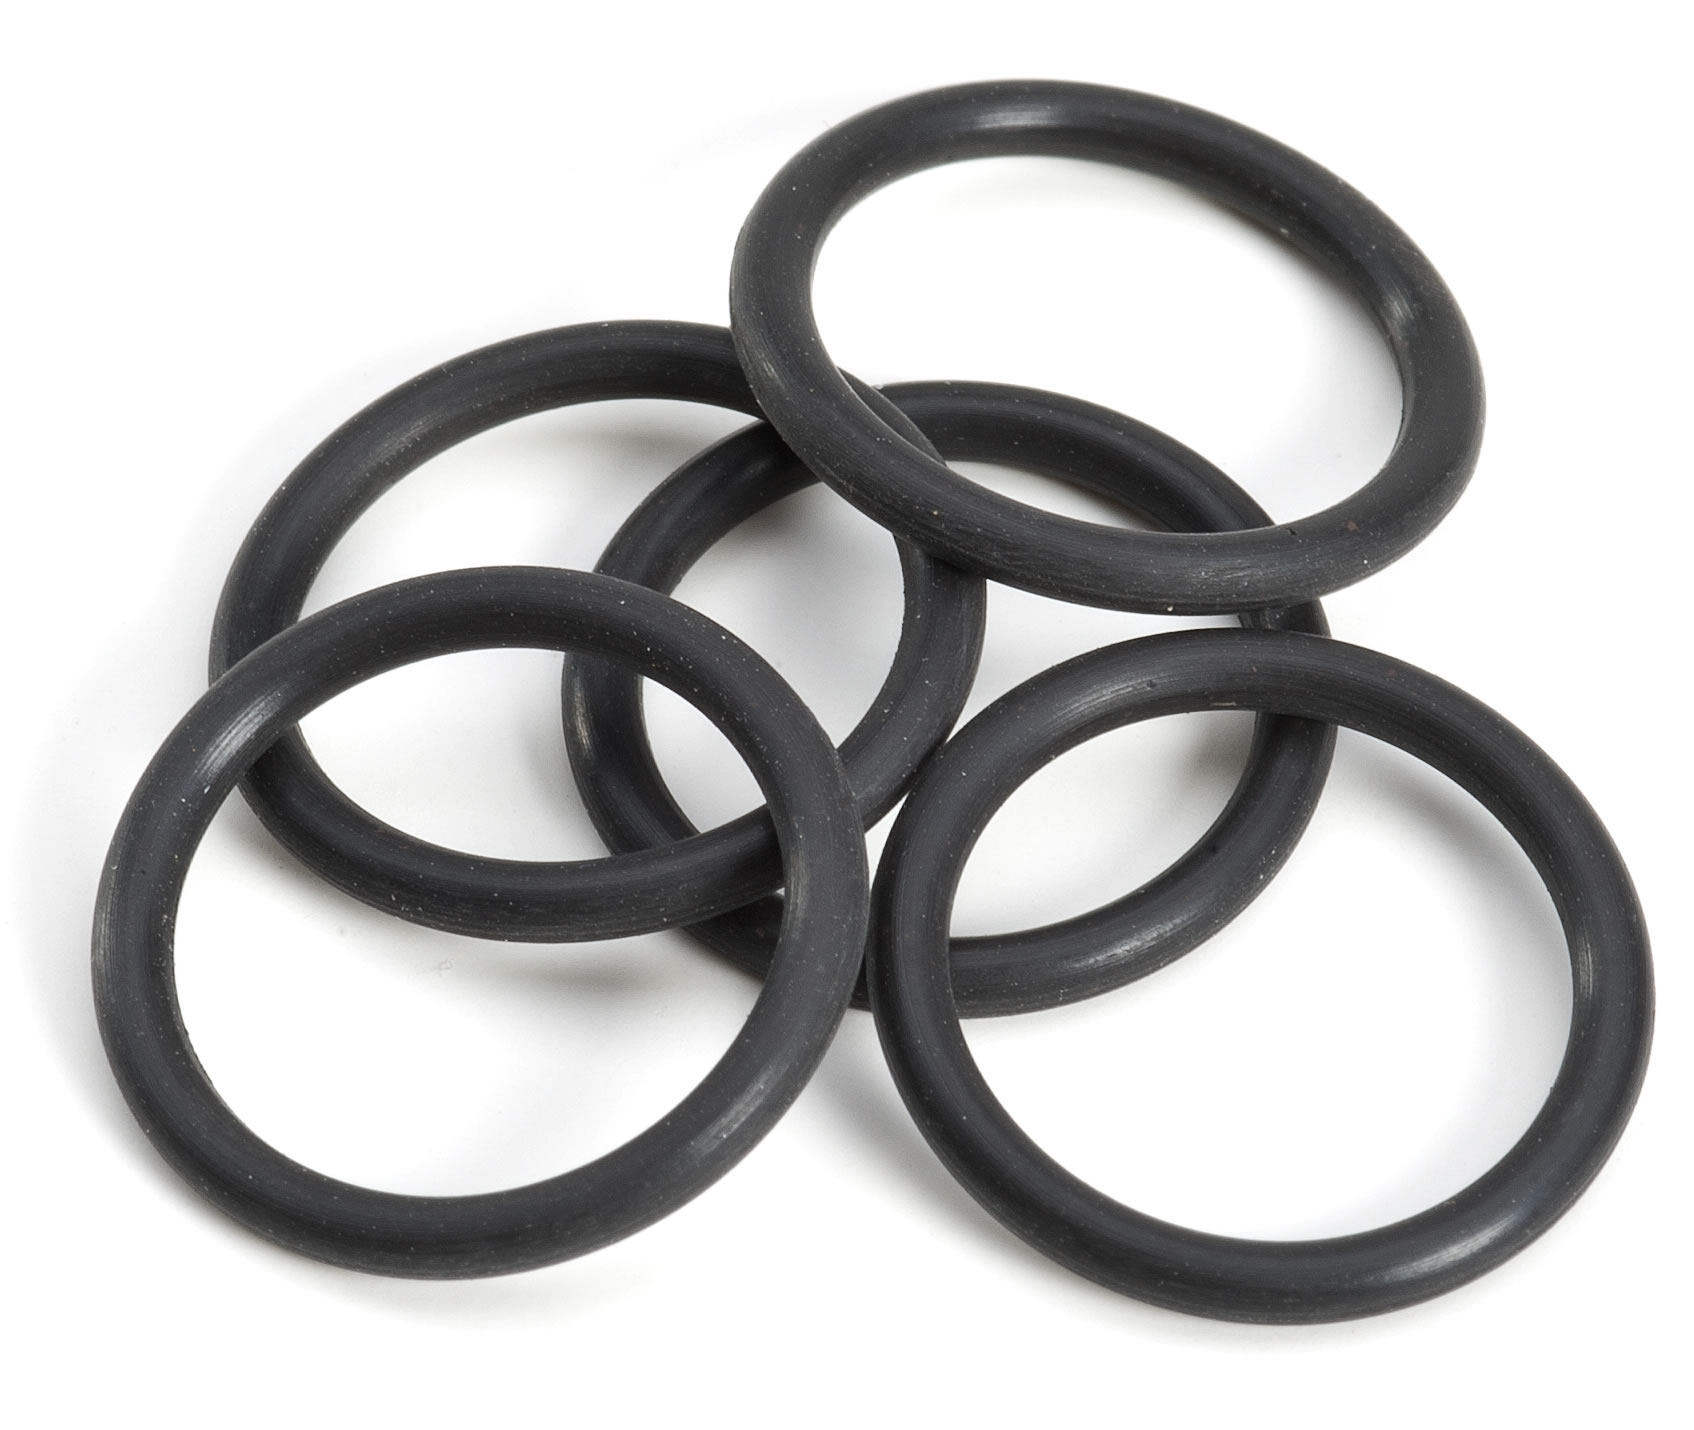 PROSEALS provides o-rings and engineered sealing products